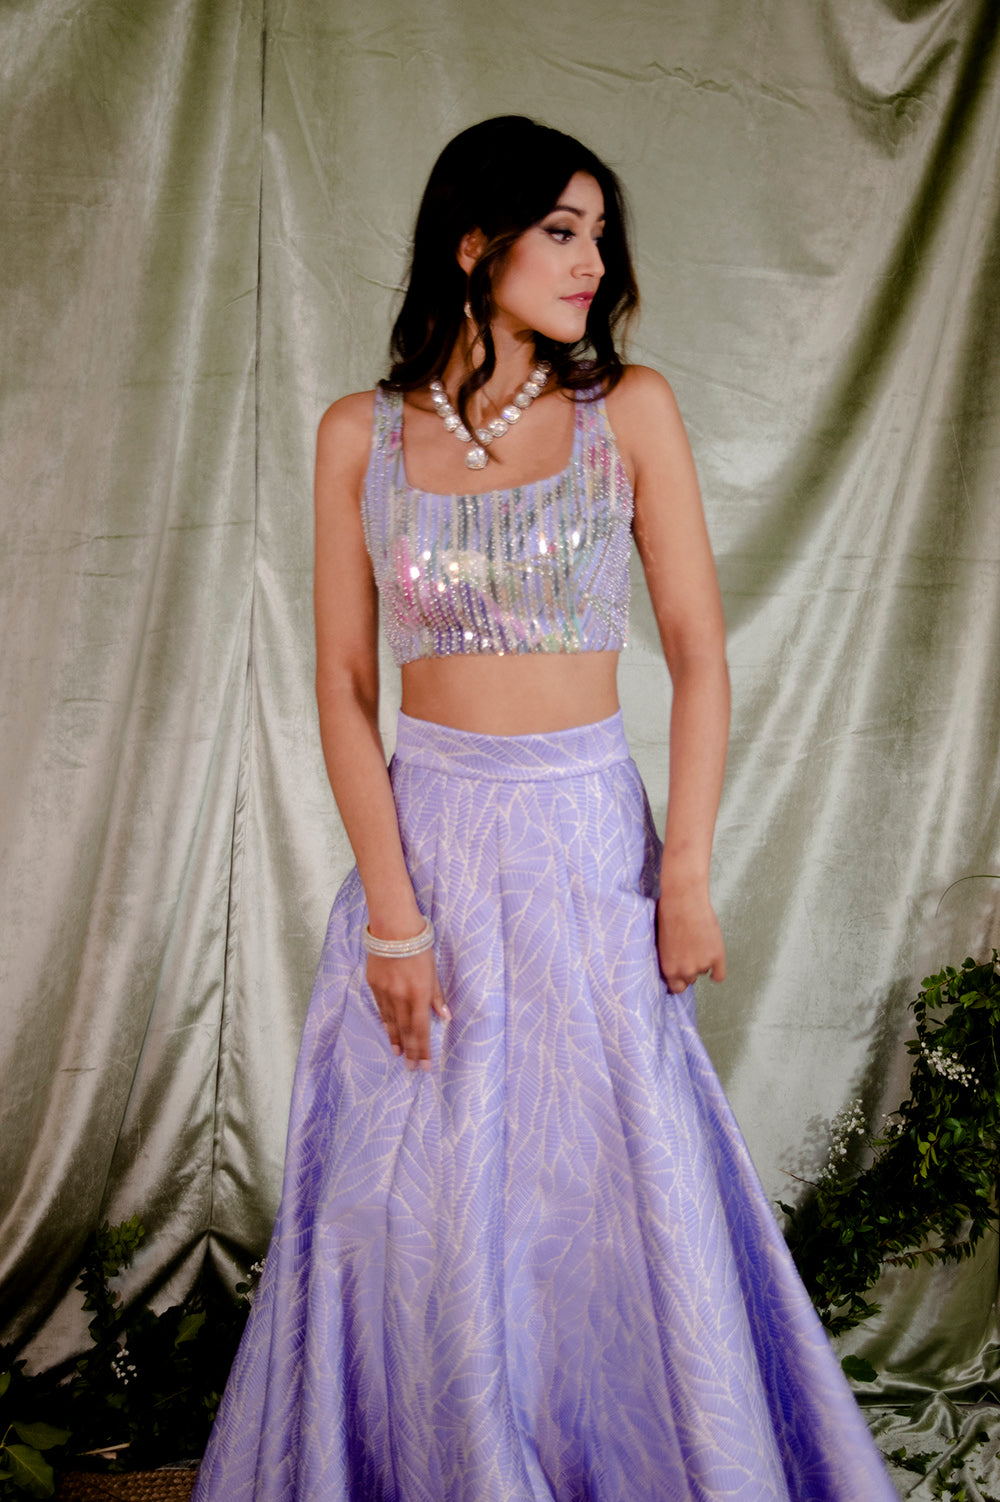 Mariella Beaded Sequin Floral Top with a Lace-up Back - Front View - Harleen Kaur